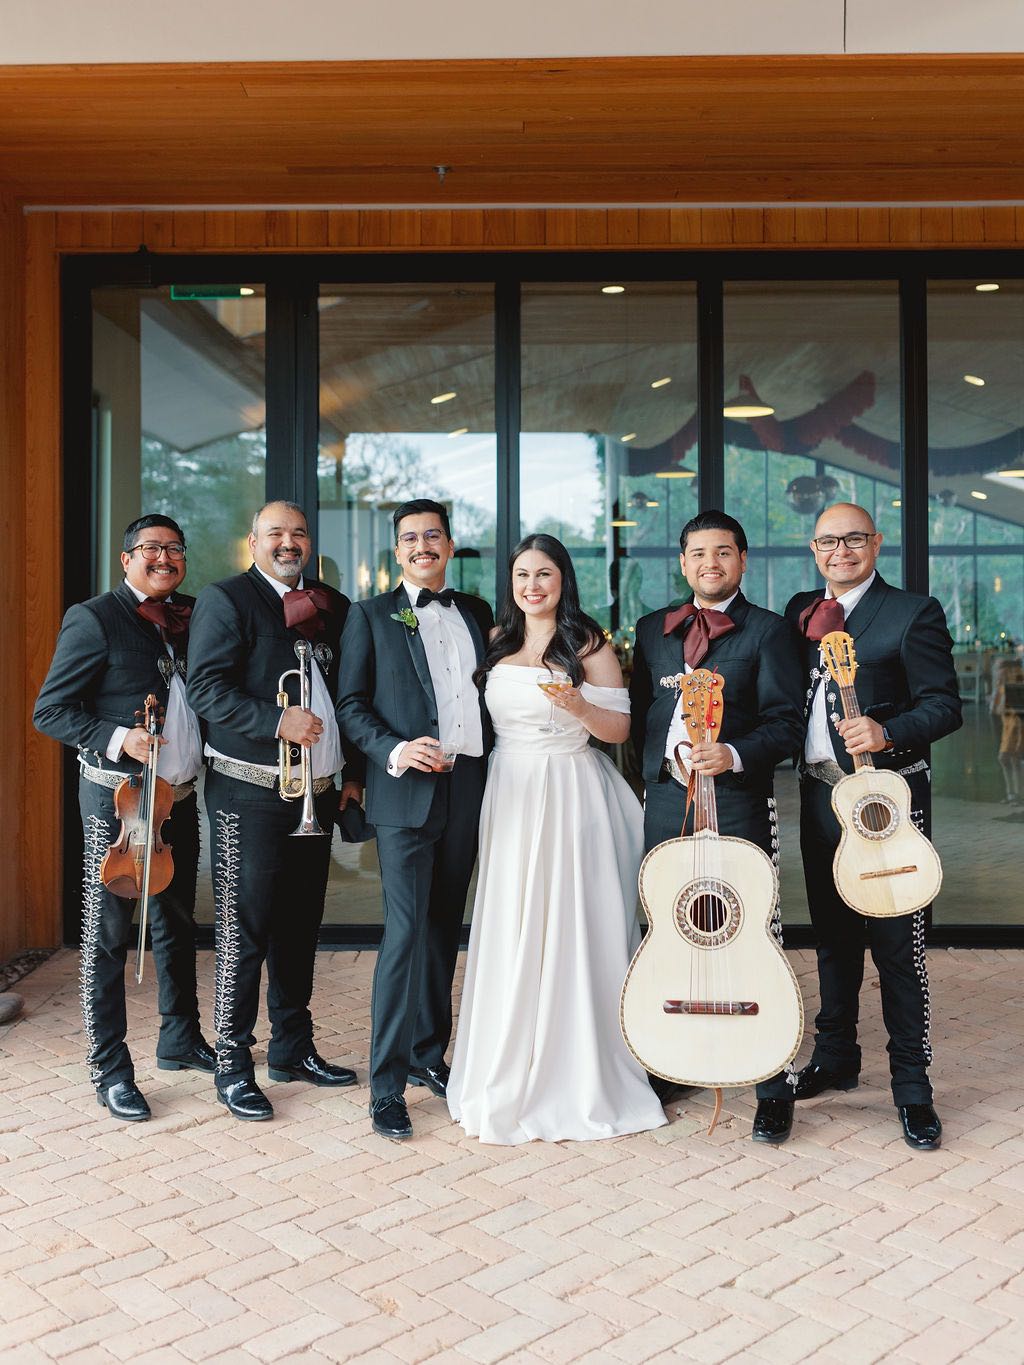 Bride and groom with mariachi band on wedding day